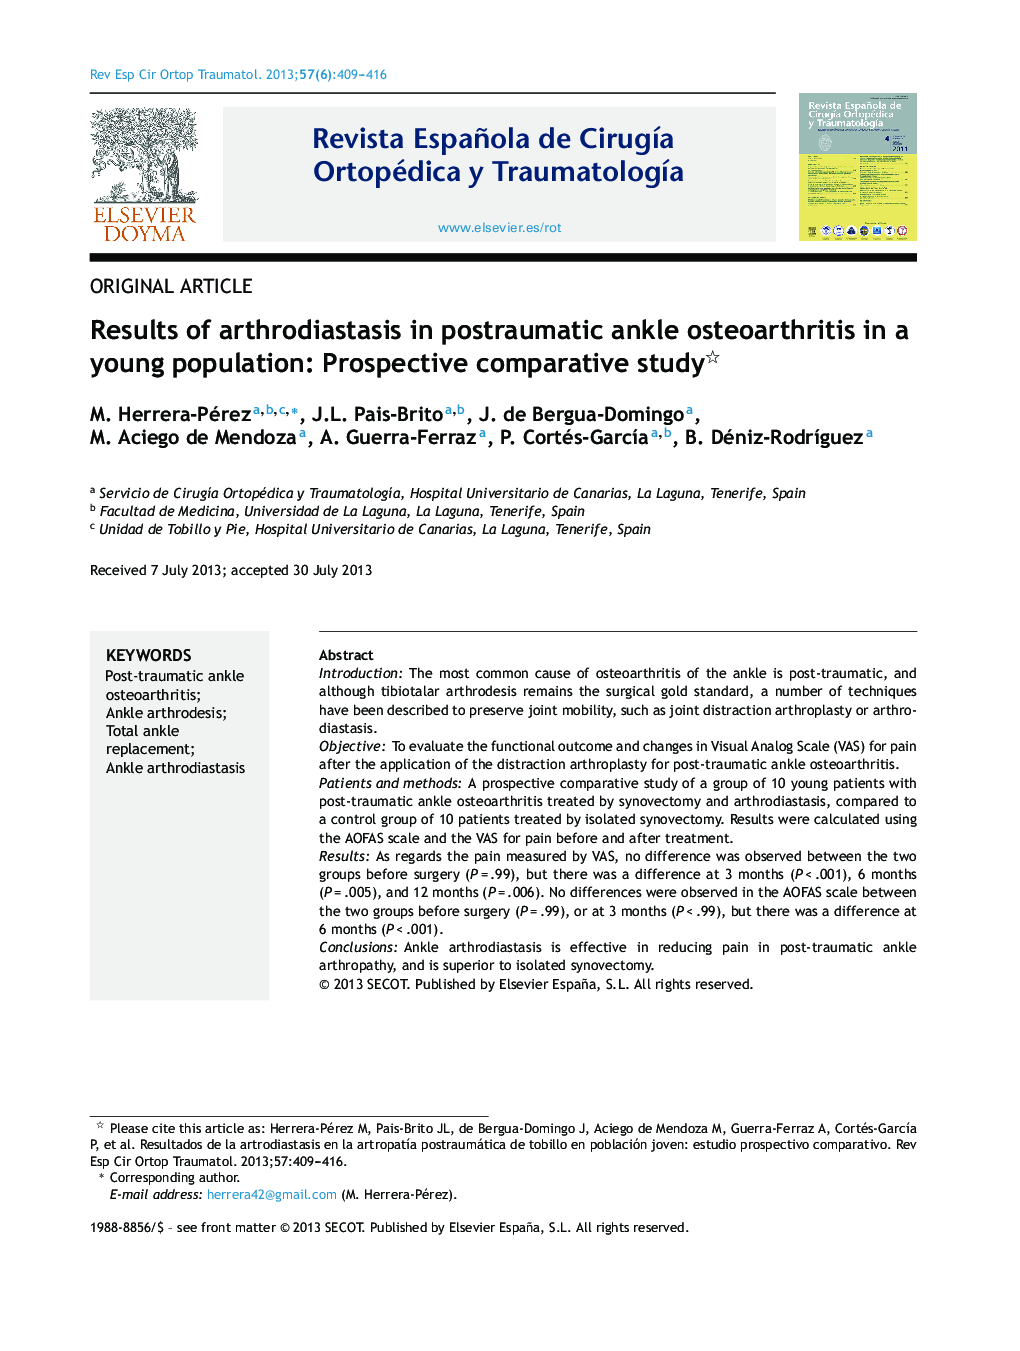 Results of arthrodiastasis in postraumatic ankle osteoarthritis in a young population: Prospective comparative study 